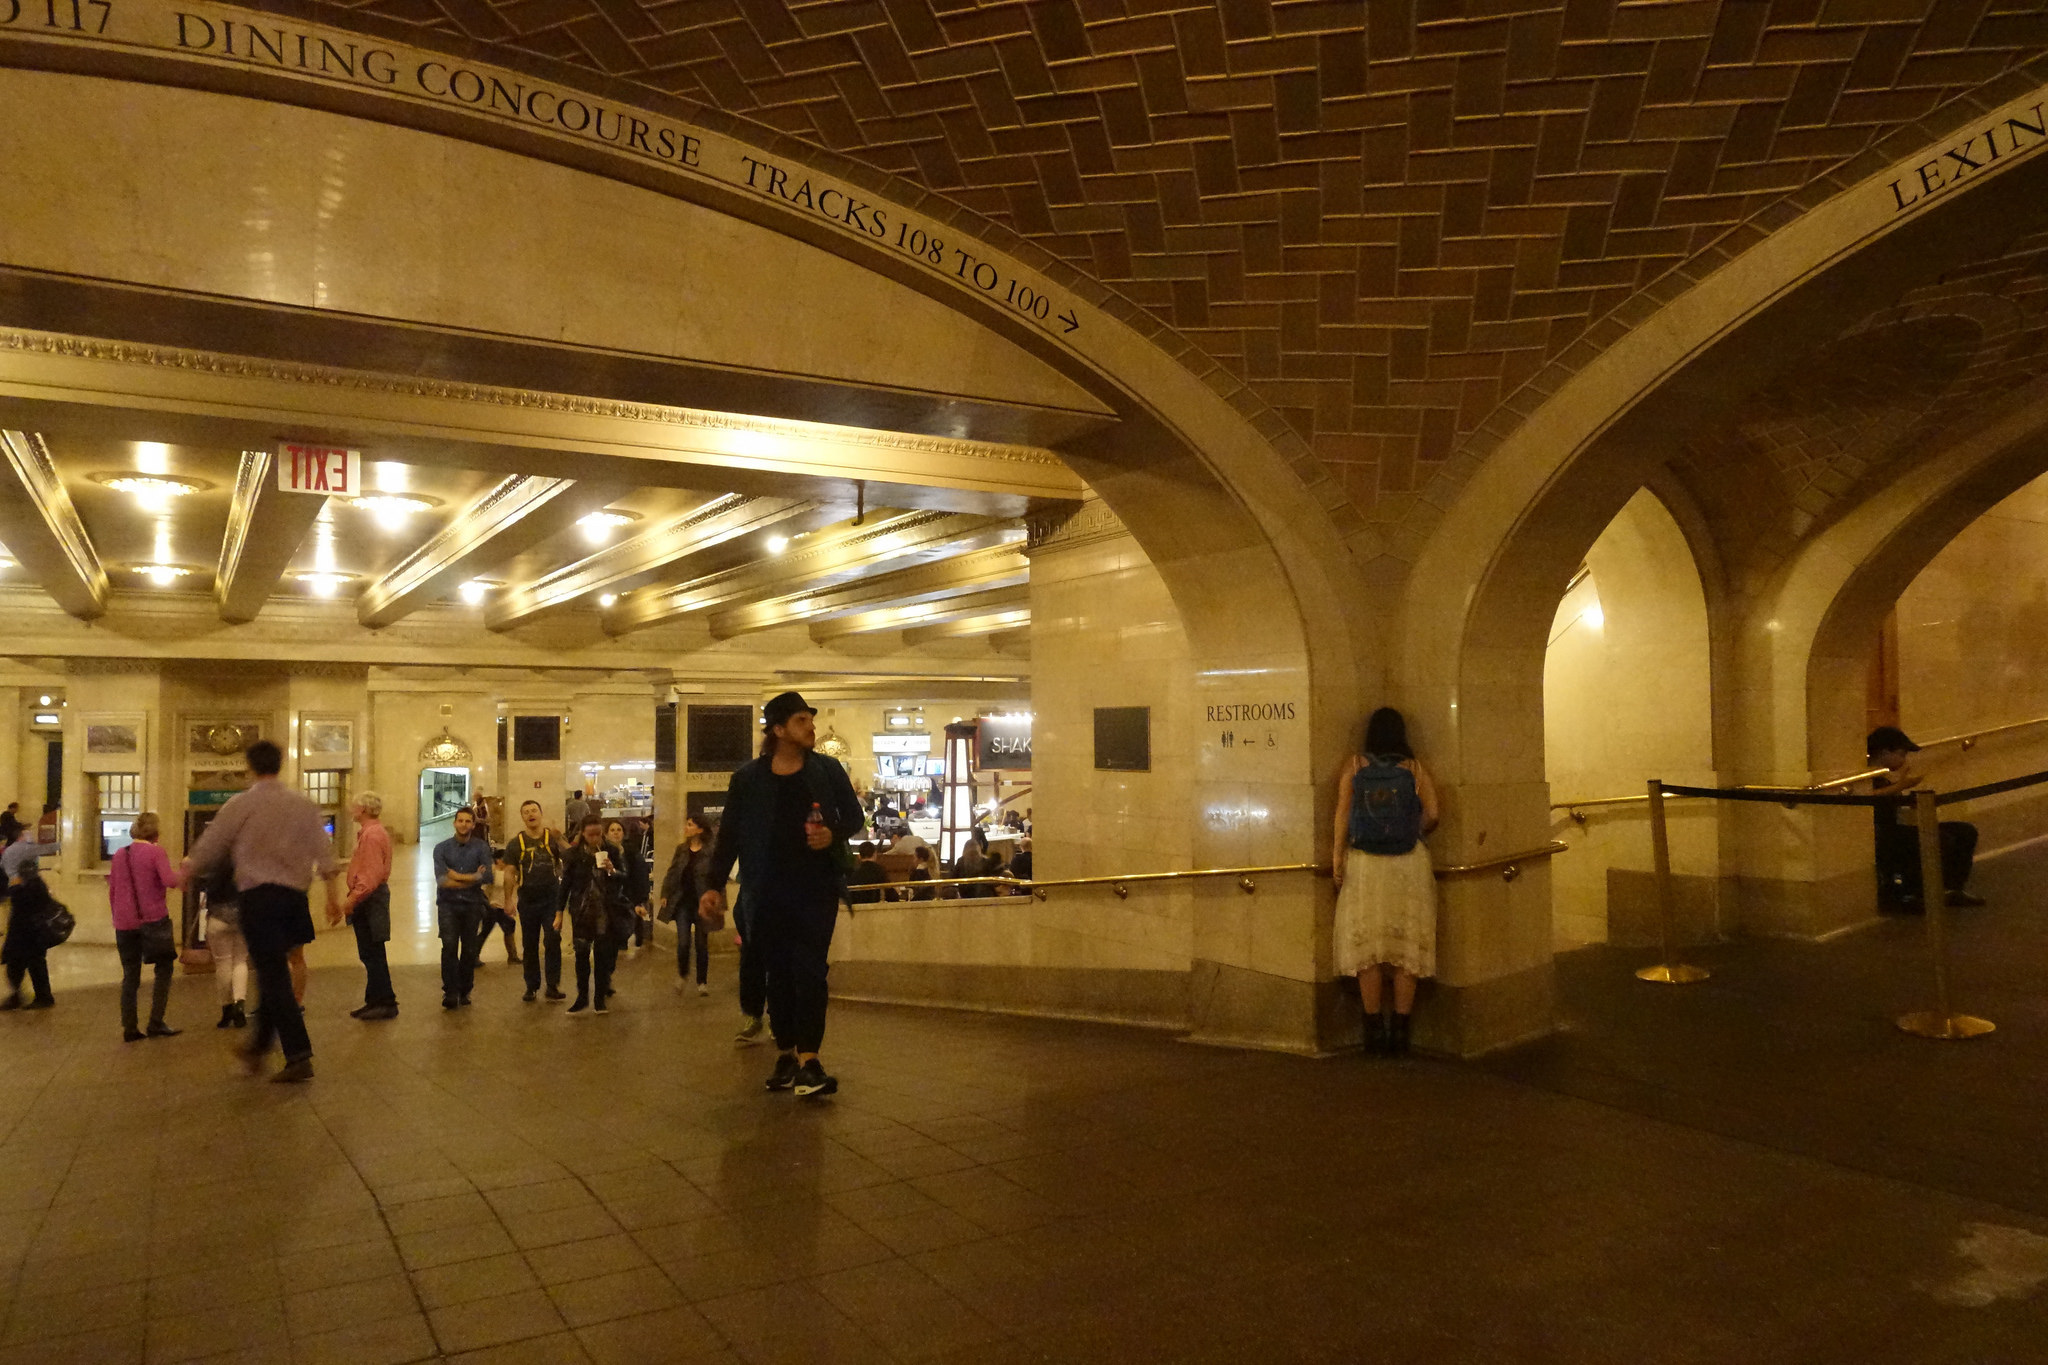 Explore the Many Wonders of Grand Central, Hidden in Plain Sight